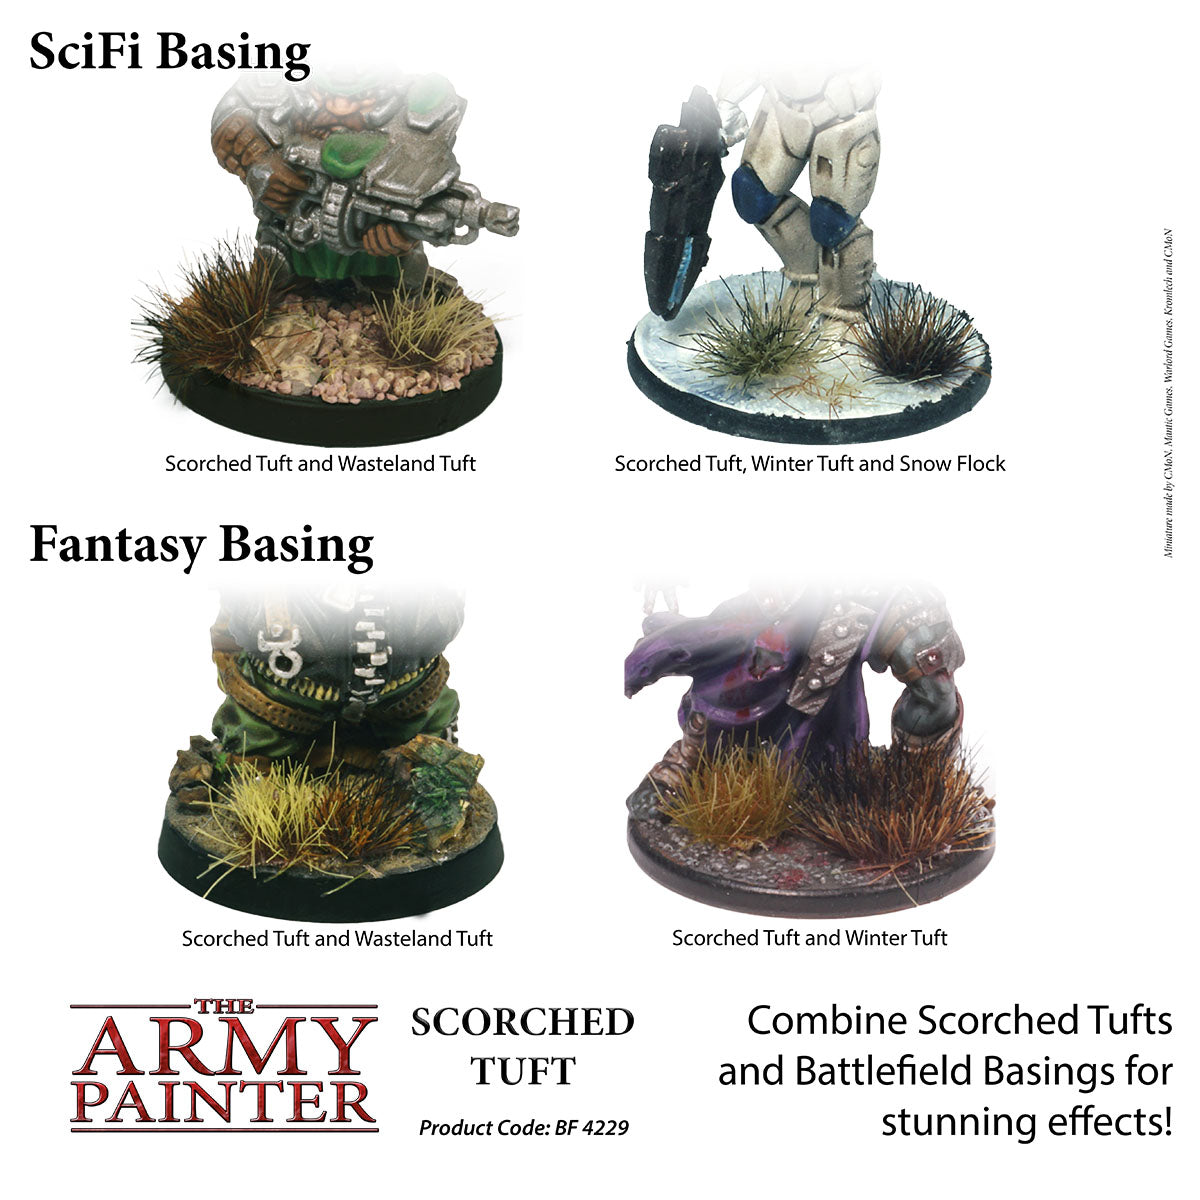 The Army Painter - Scorched Tuft BF4229